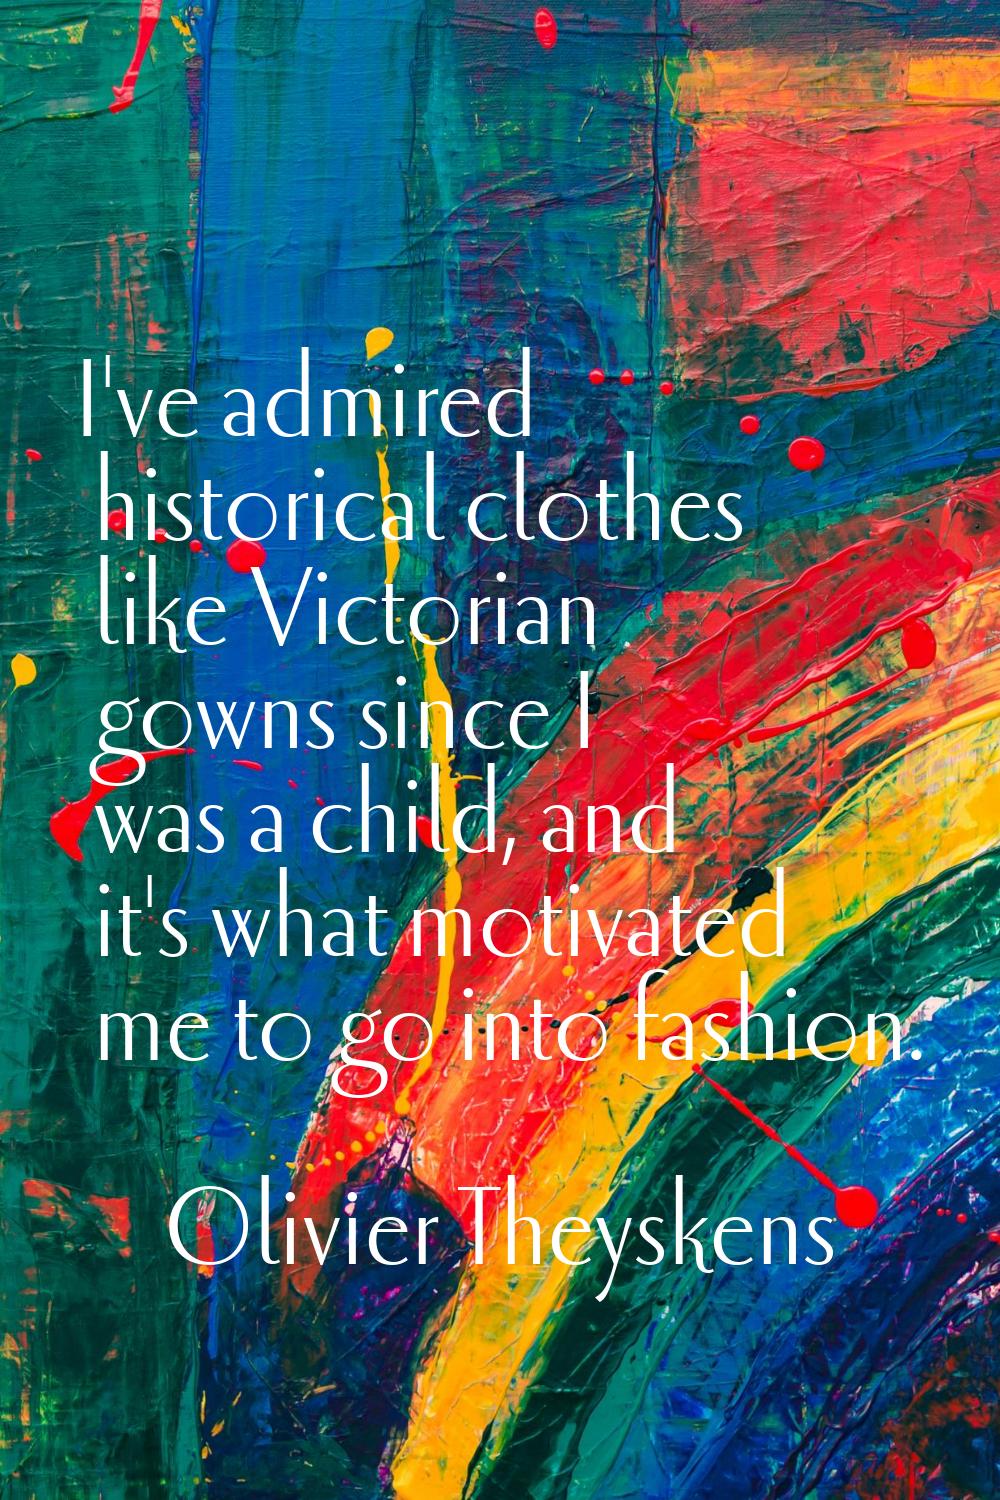 I've admired historical clothes like Victorian gowns since I was a child, and it's what motivated m